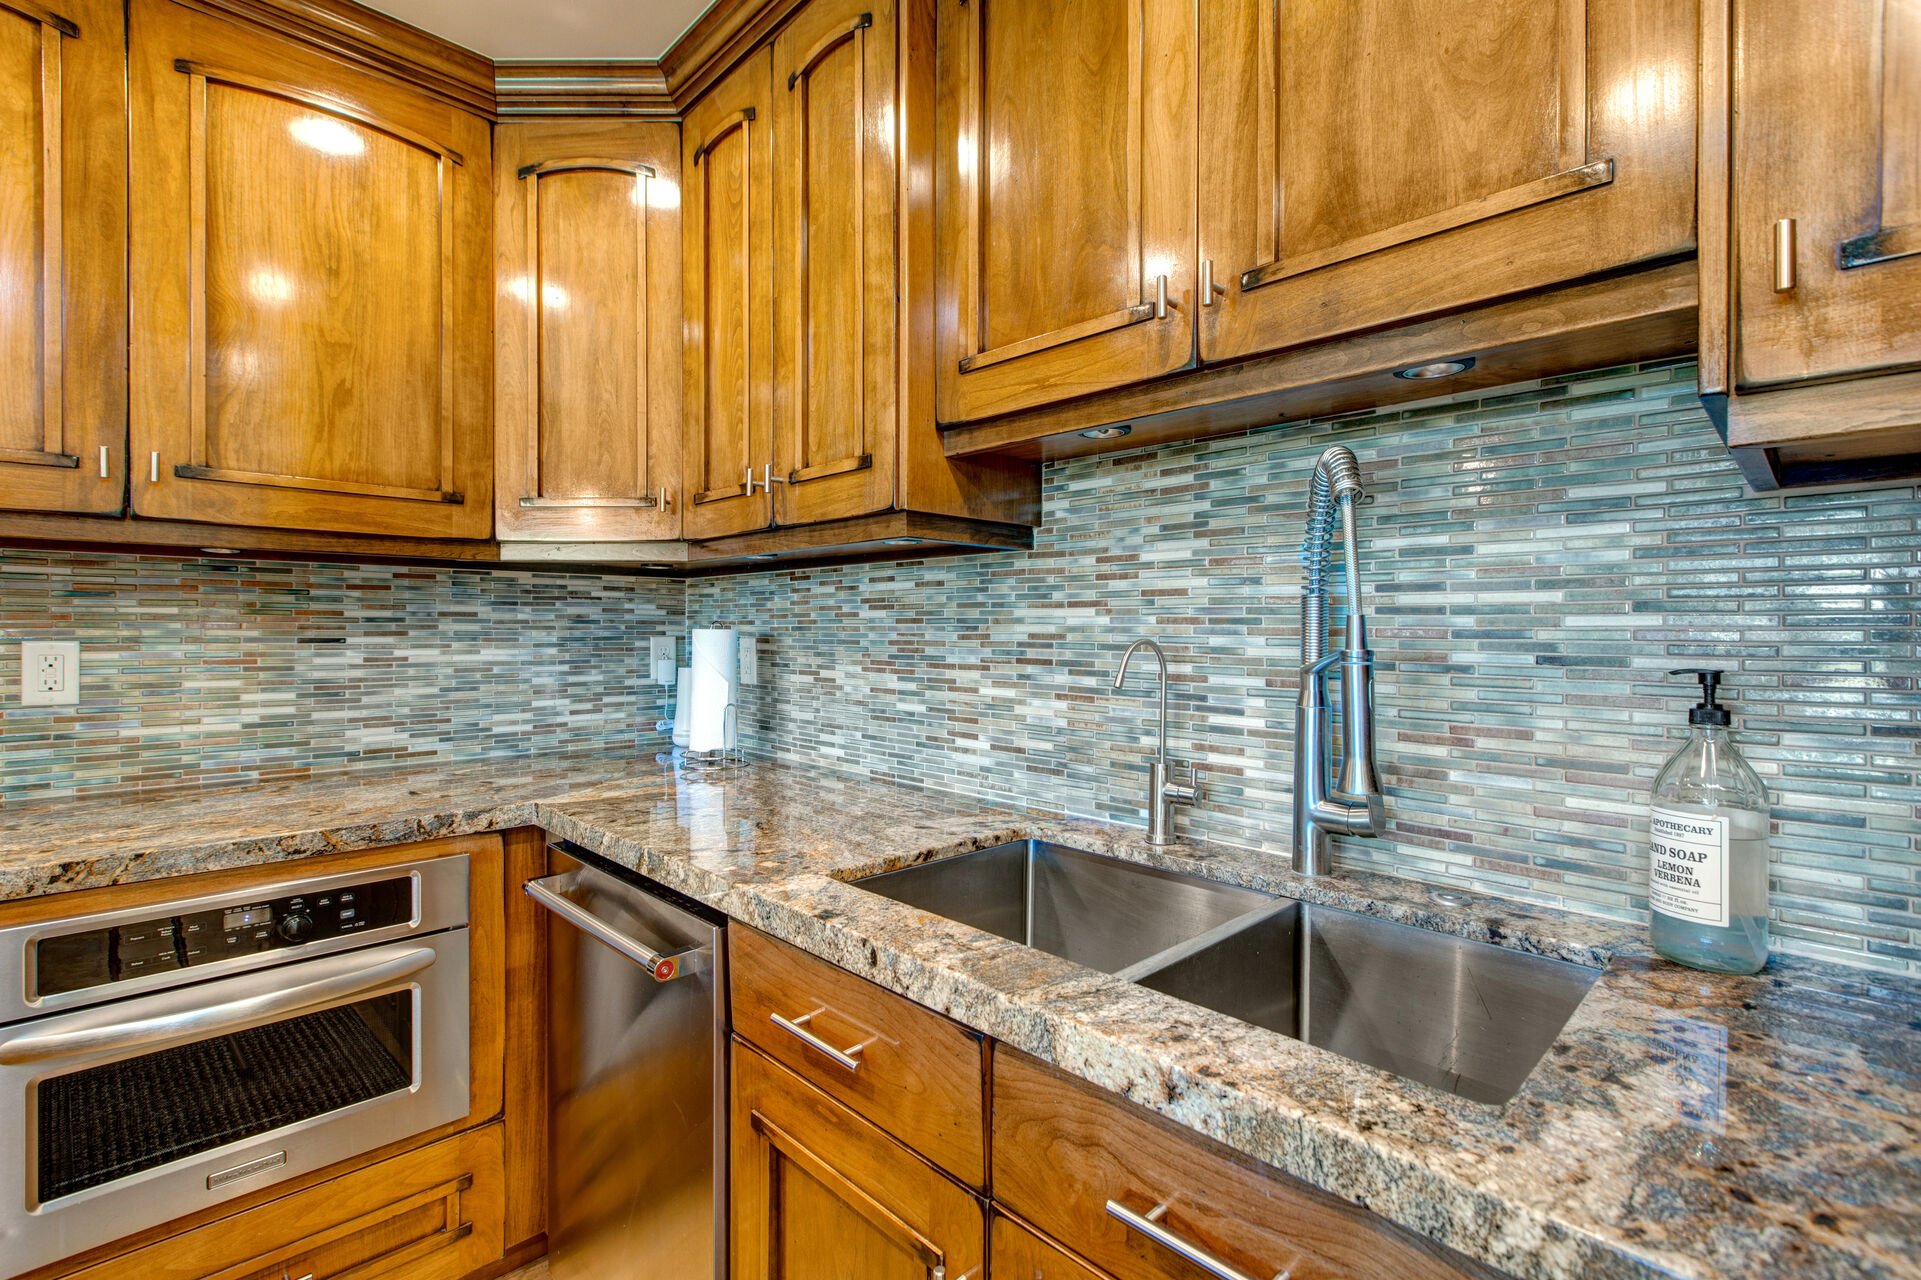 Fully Equipped Kitchen with gorgeous stone countertops, stainless steel appliances - including double ovens - ice maker, and bar seating for three